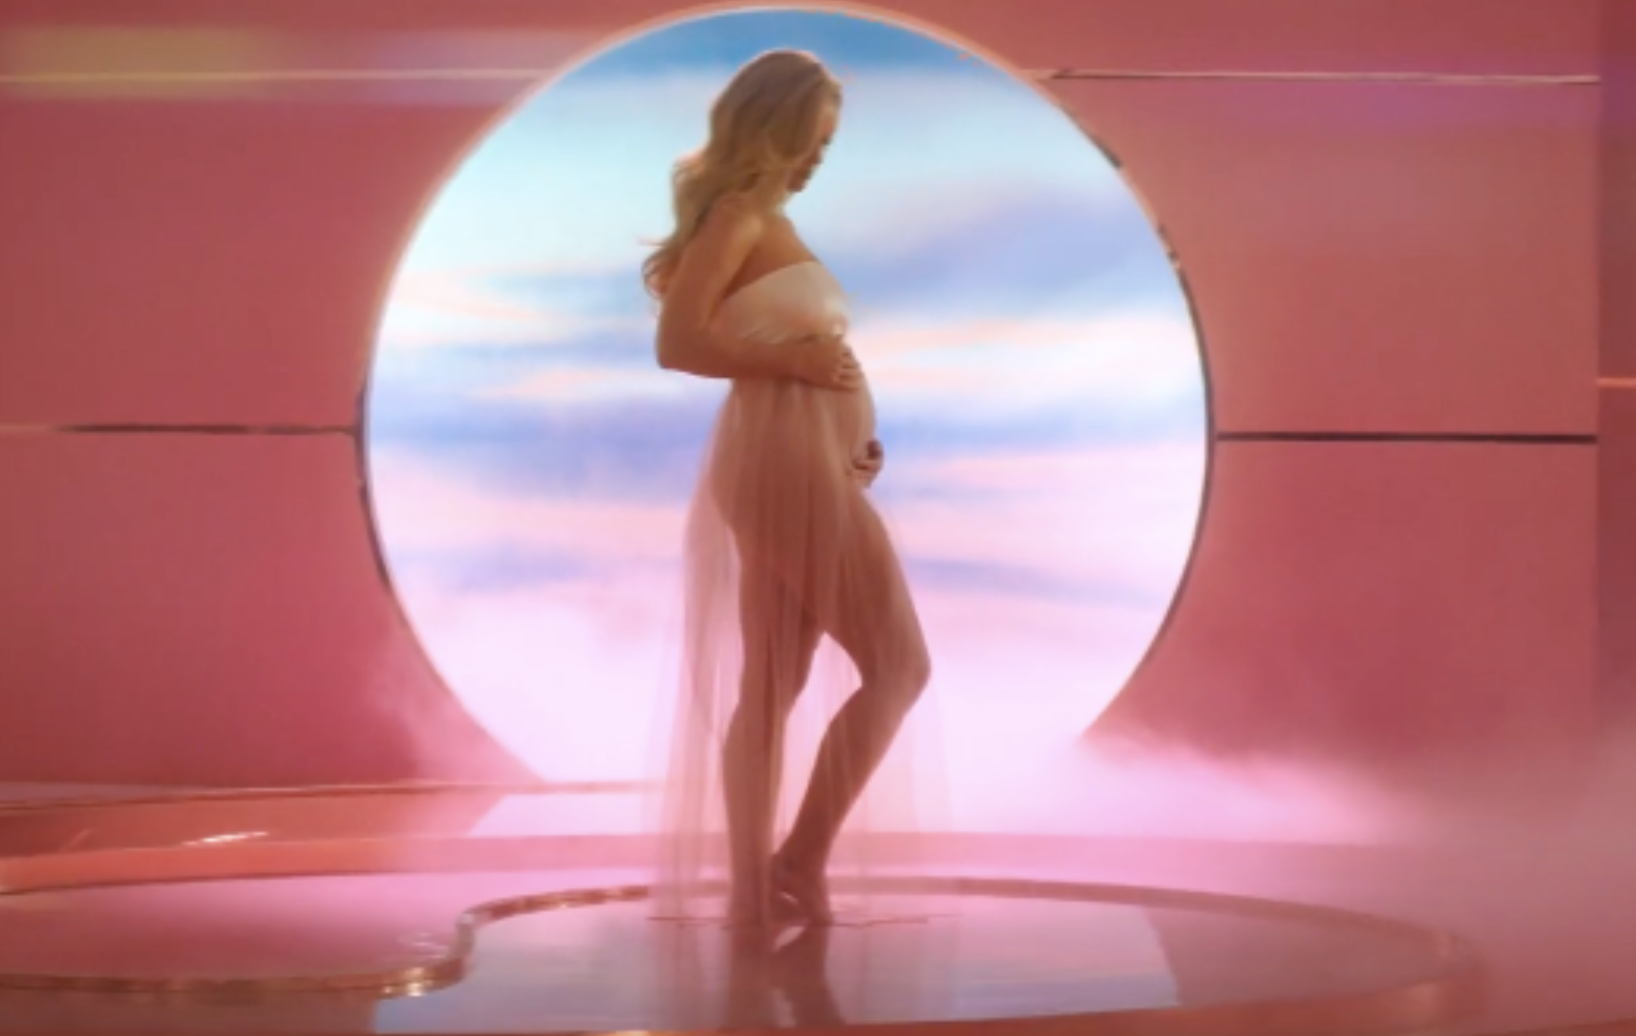 Katy reveals her baby bump for the first time in the video for &quot;Never Worn White&quot;.